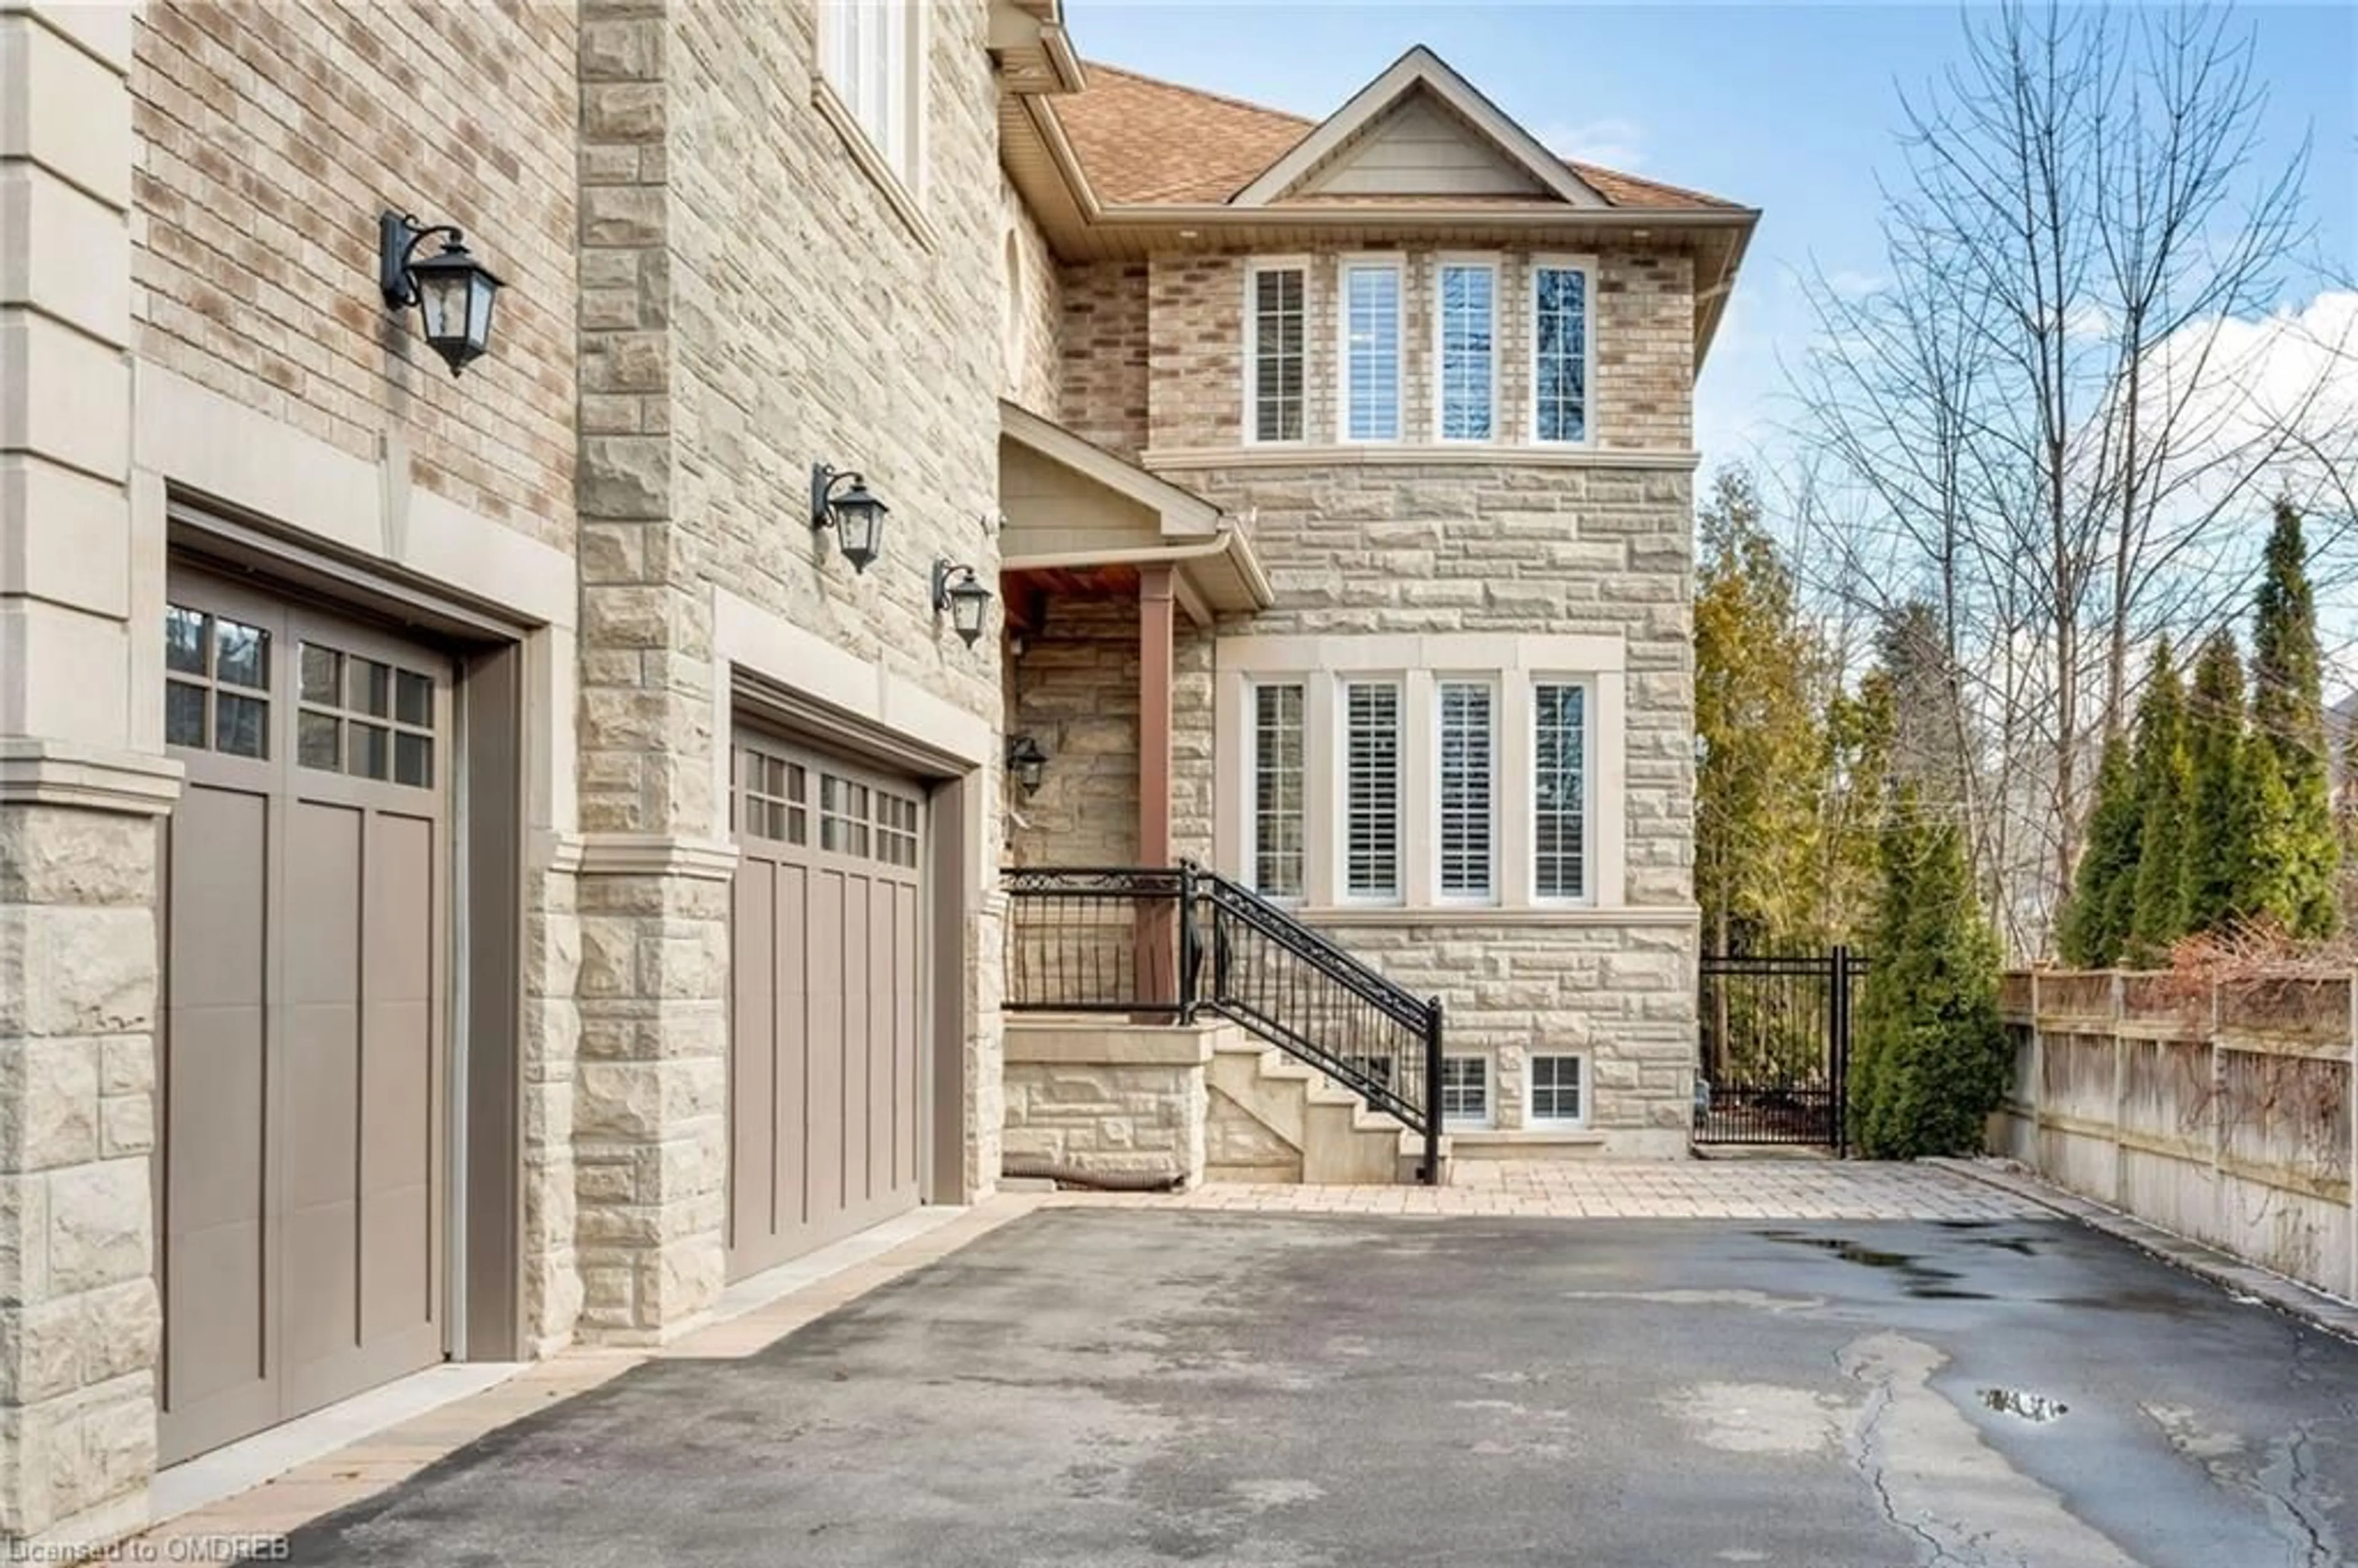 Home with brick exterior material for 2431 Old Carriage Rd, Mississauga Ontario L5C 1Y6